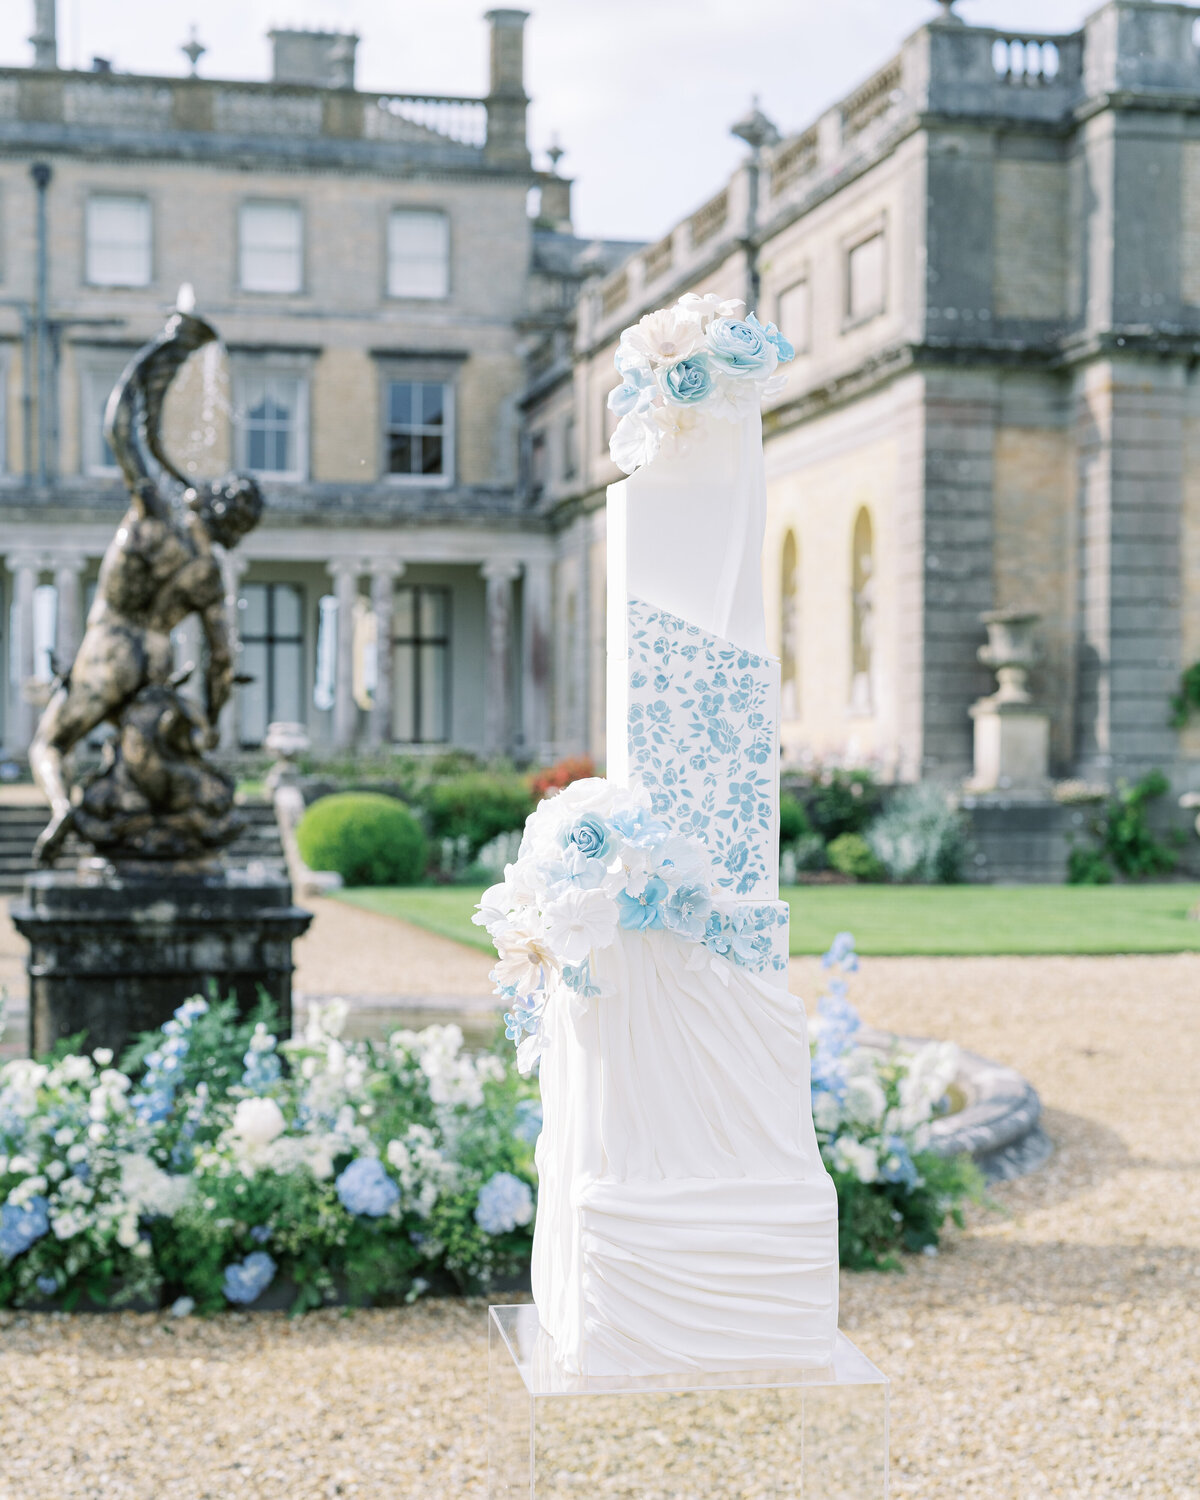 White and blue wedding cake and flowers at Somerley House wedding venue